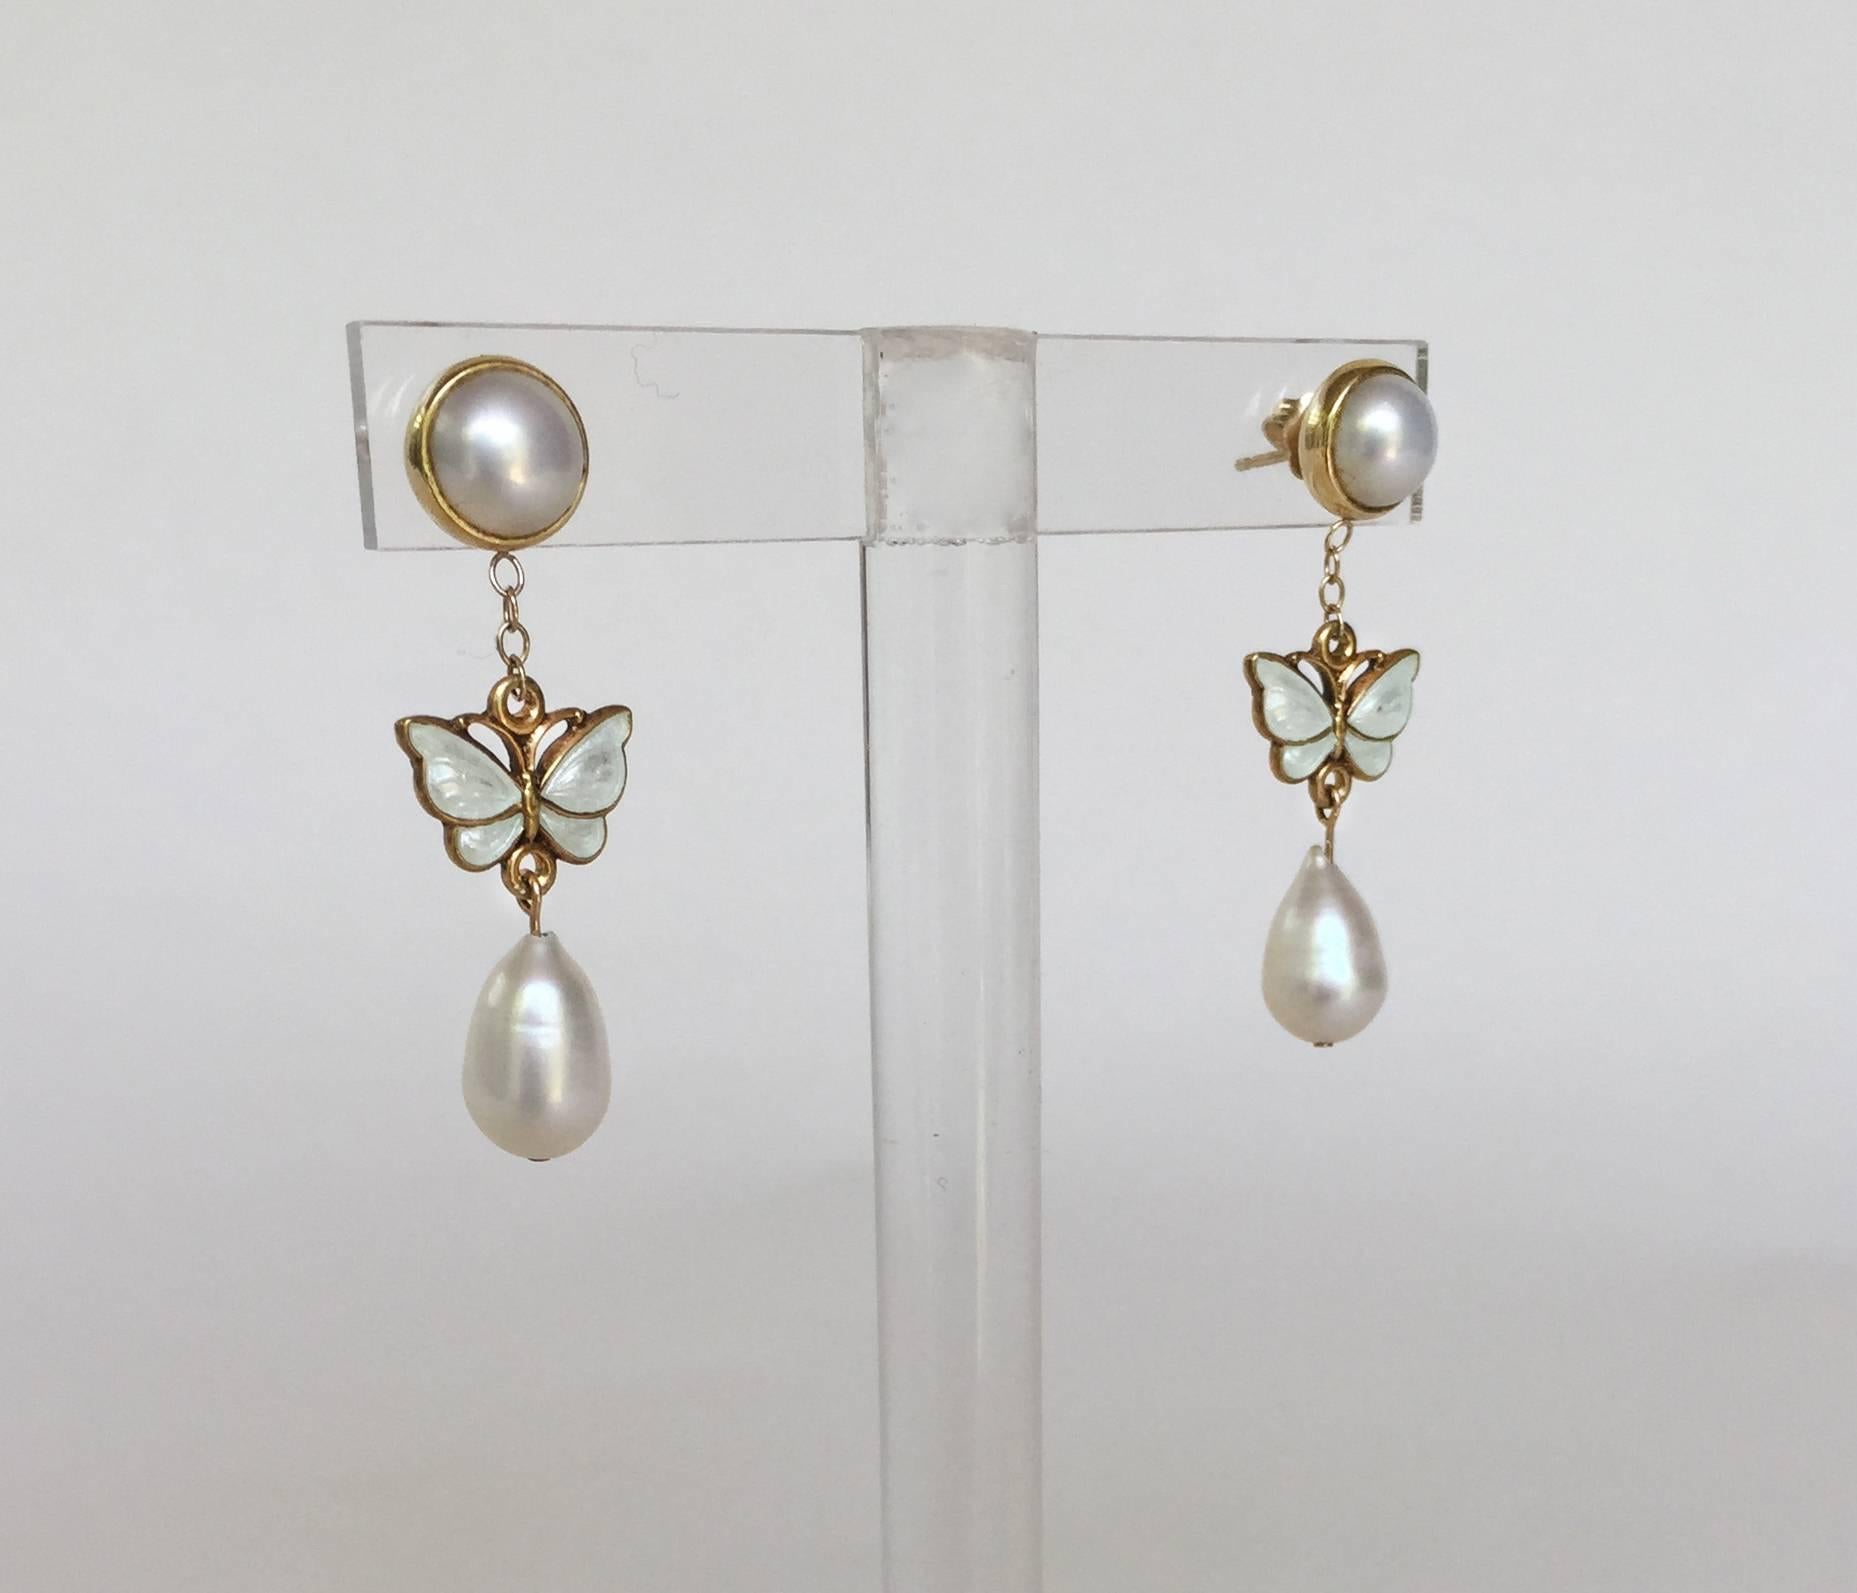 These small, but eye catching earrings have a beautiful white pearls and 14k yellow gold findings. The centerpiece of these earrings are vintage enamel butterflies, that almost look like they are flying dangling from the 14k yellow gold chain. They